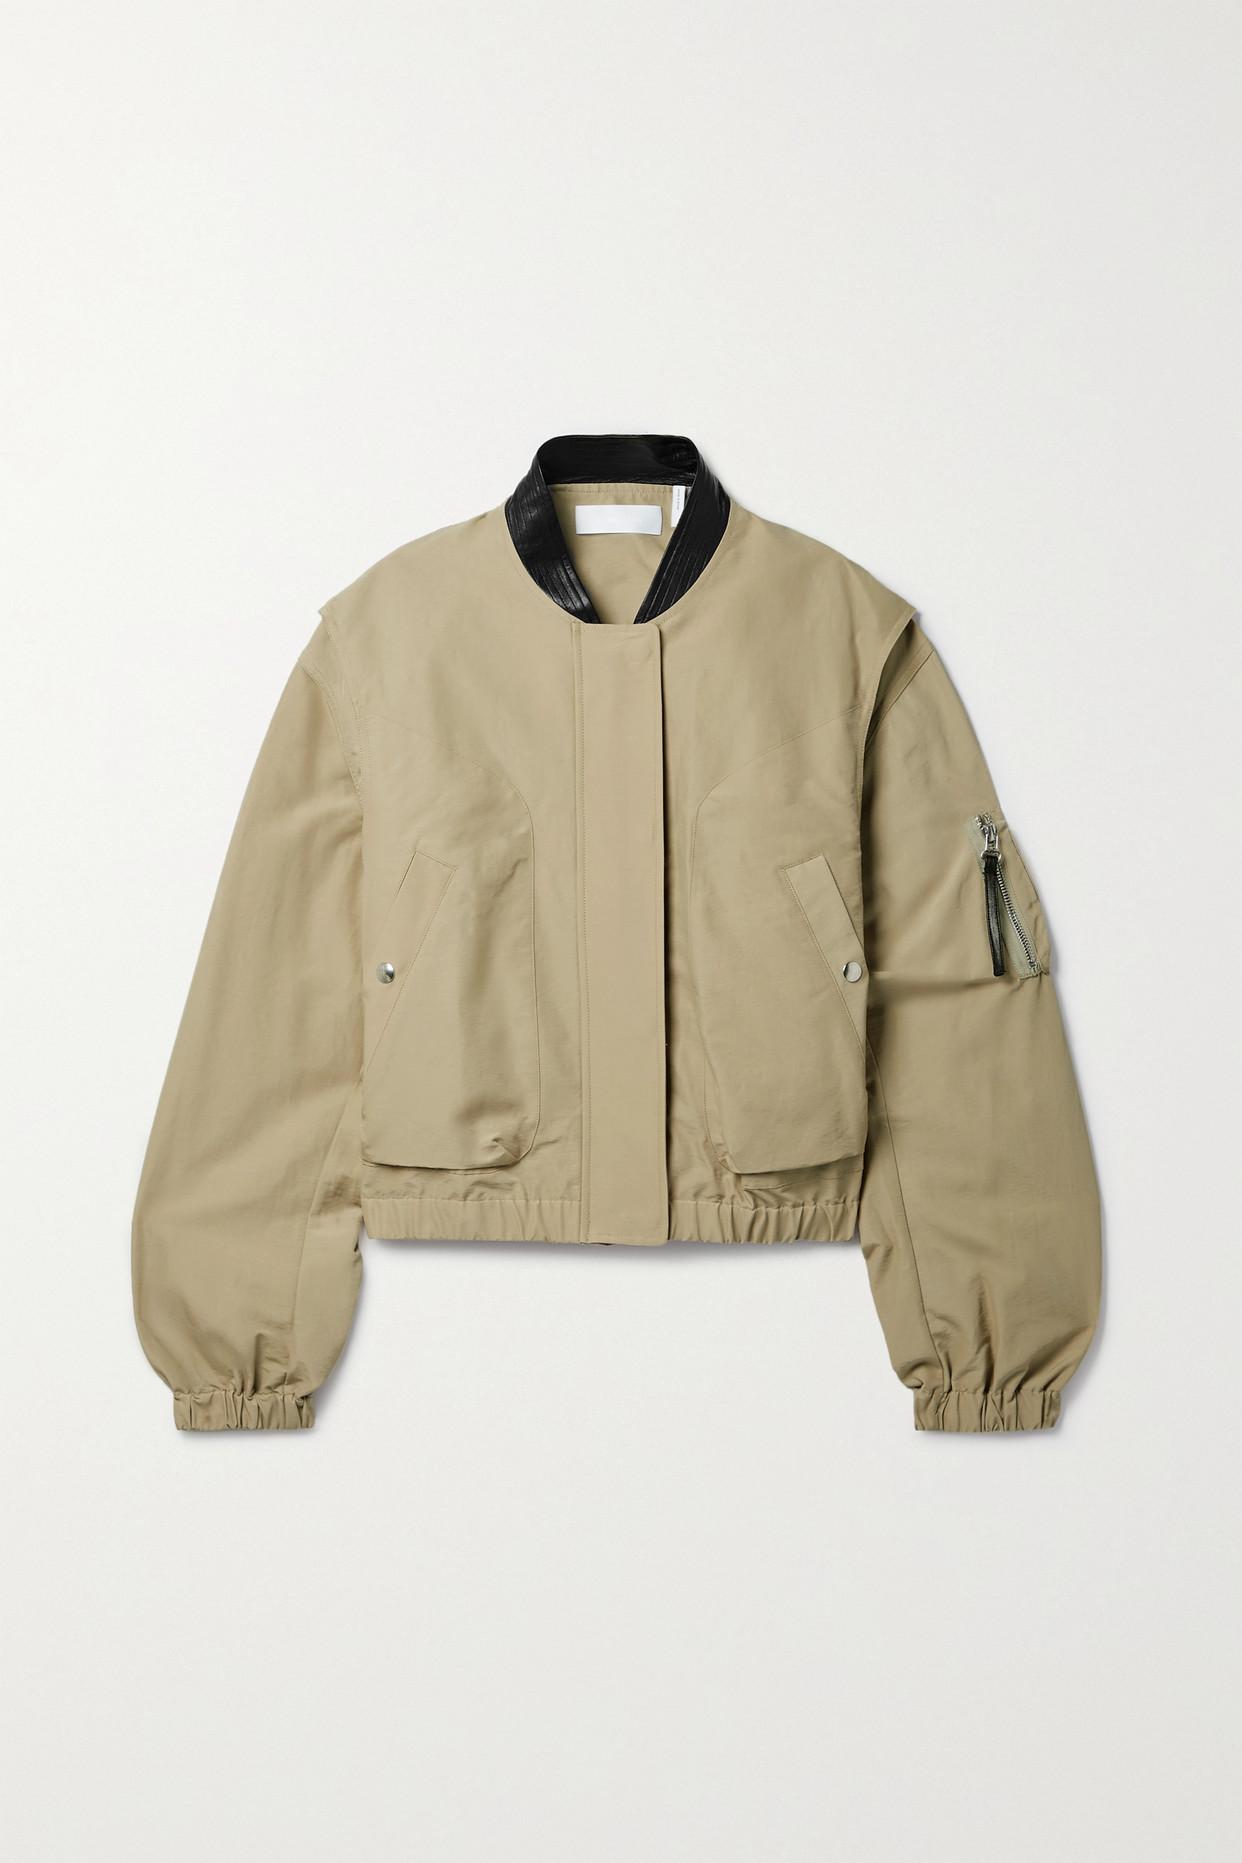 Helmut Lang Layered Cotton-blend Bomber Jacket in Natural | Lyst